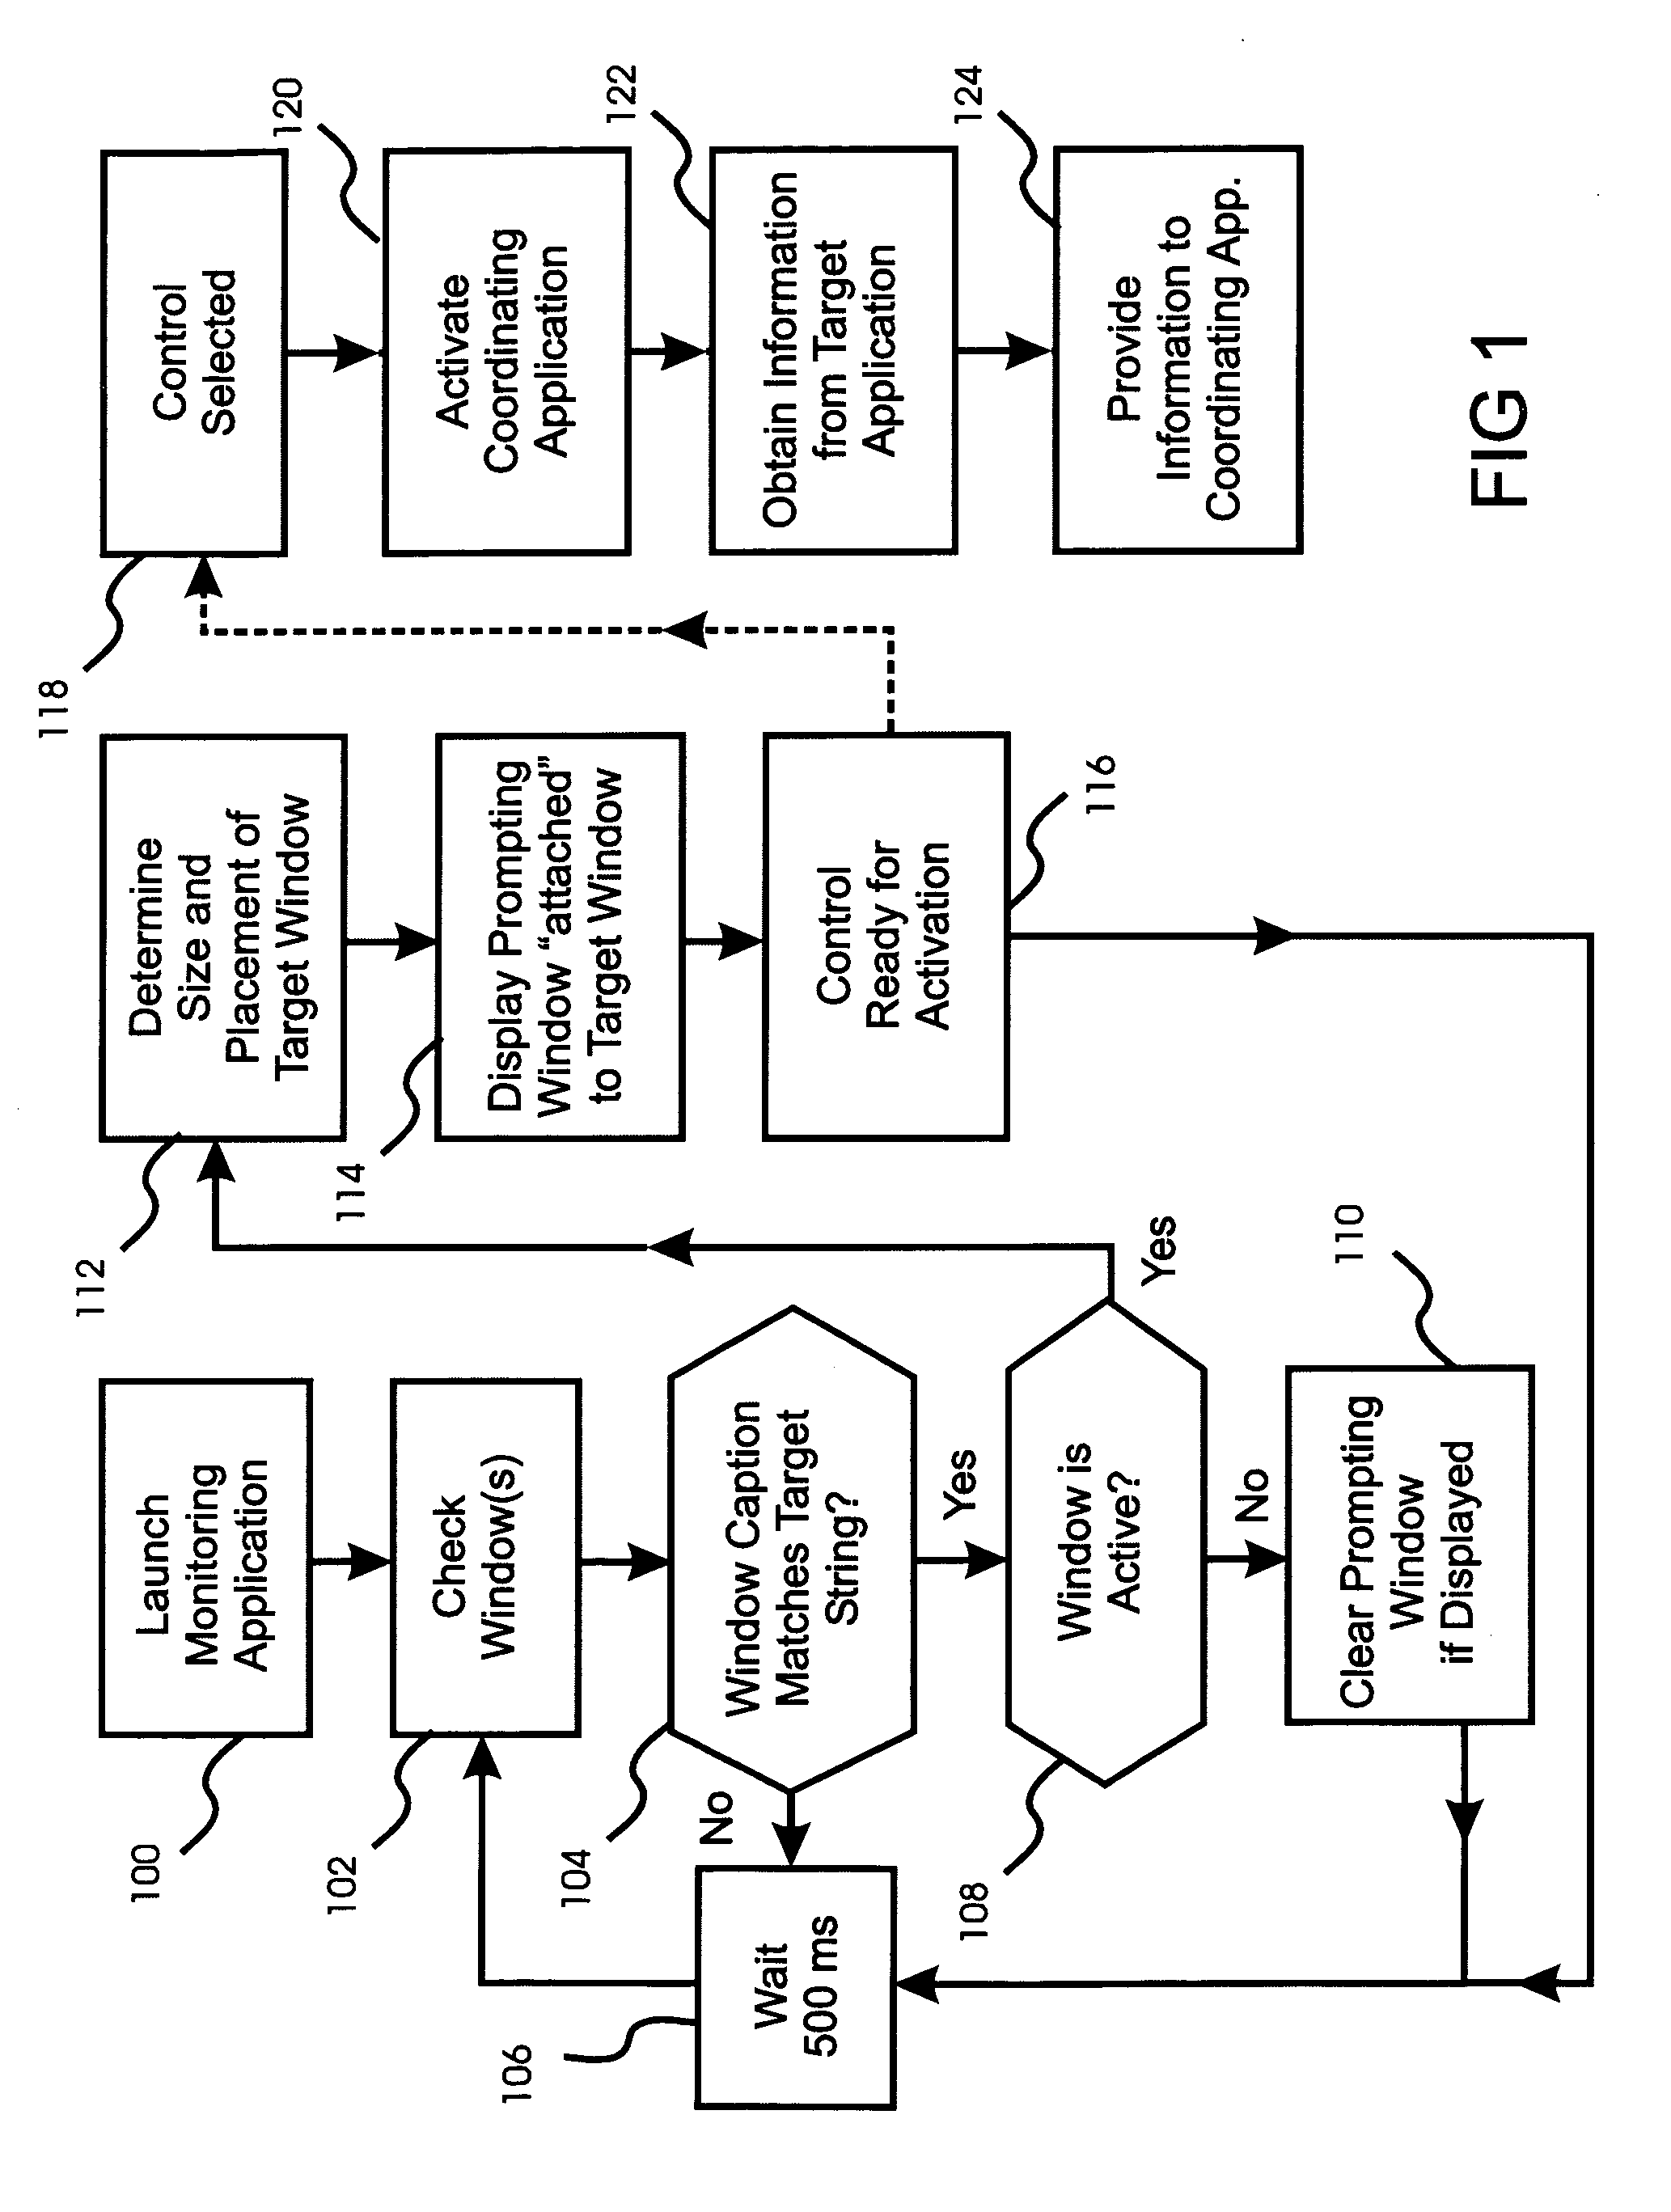 Method for Facilitating Cooperative Interaction between Software Applications